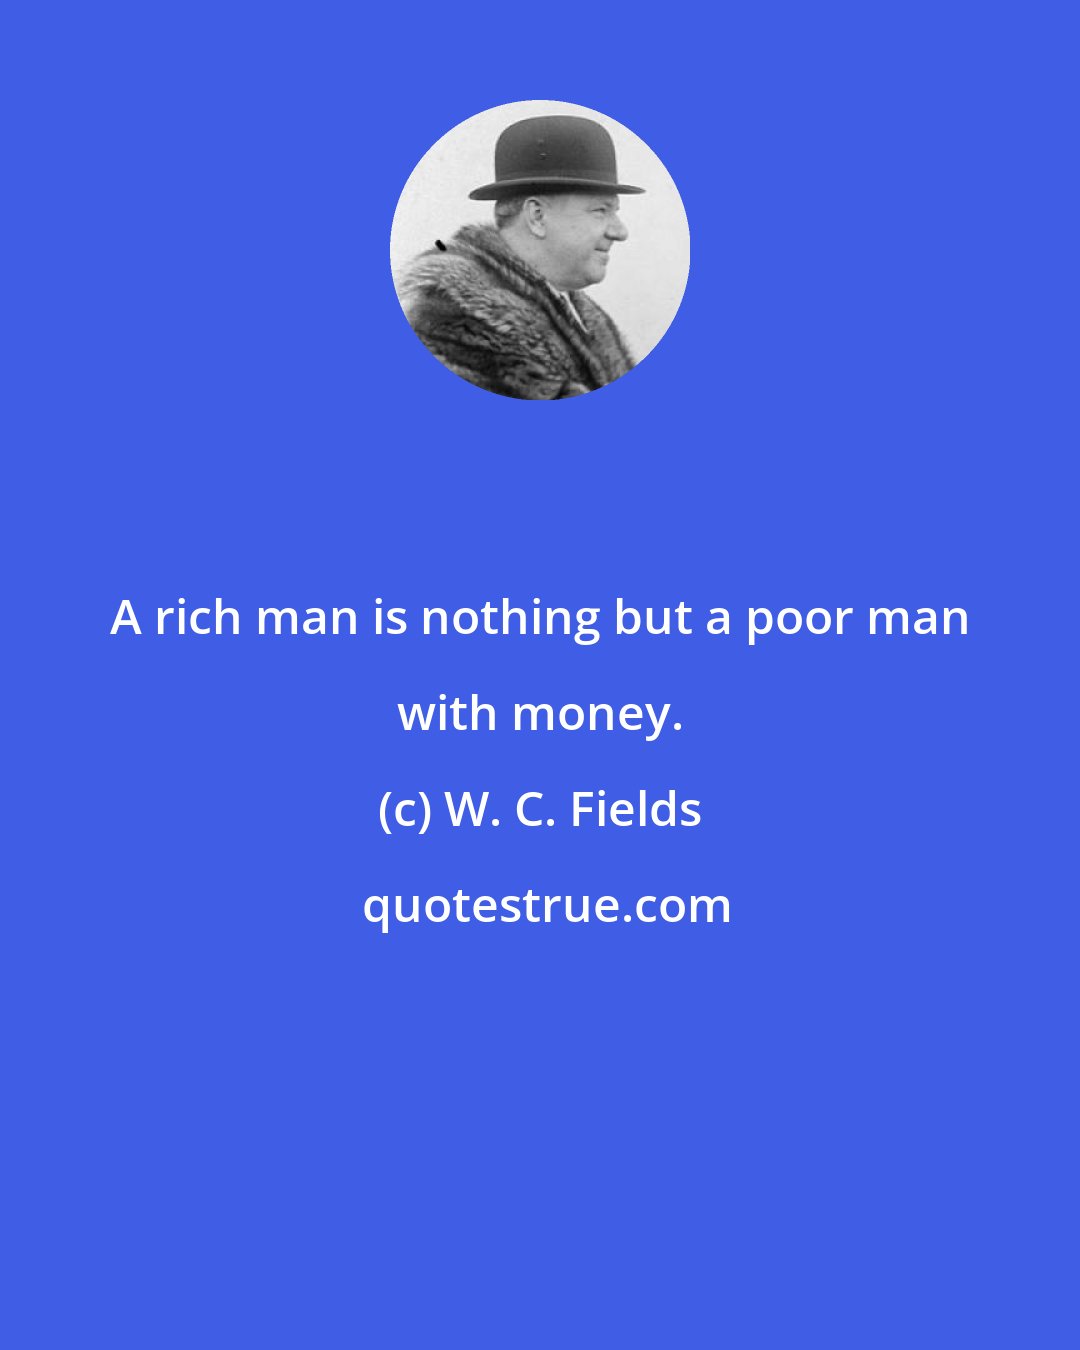 W. C. Fields: A rich man is nothing but a poor man with money.